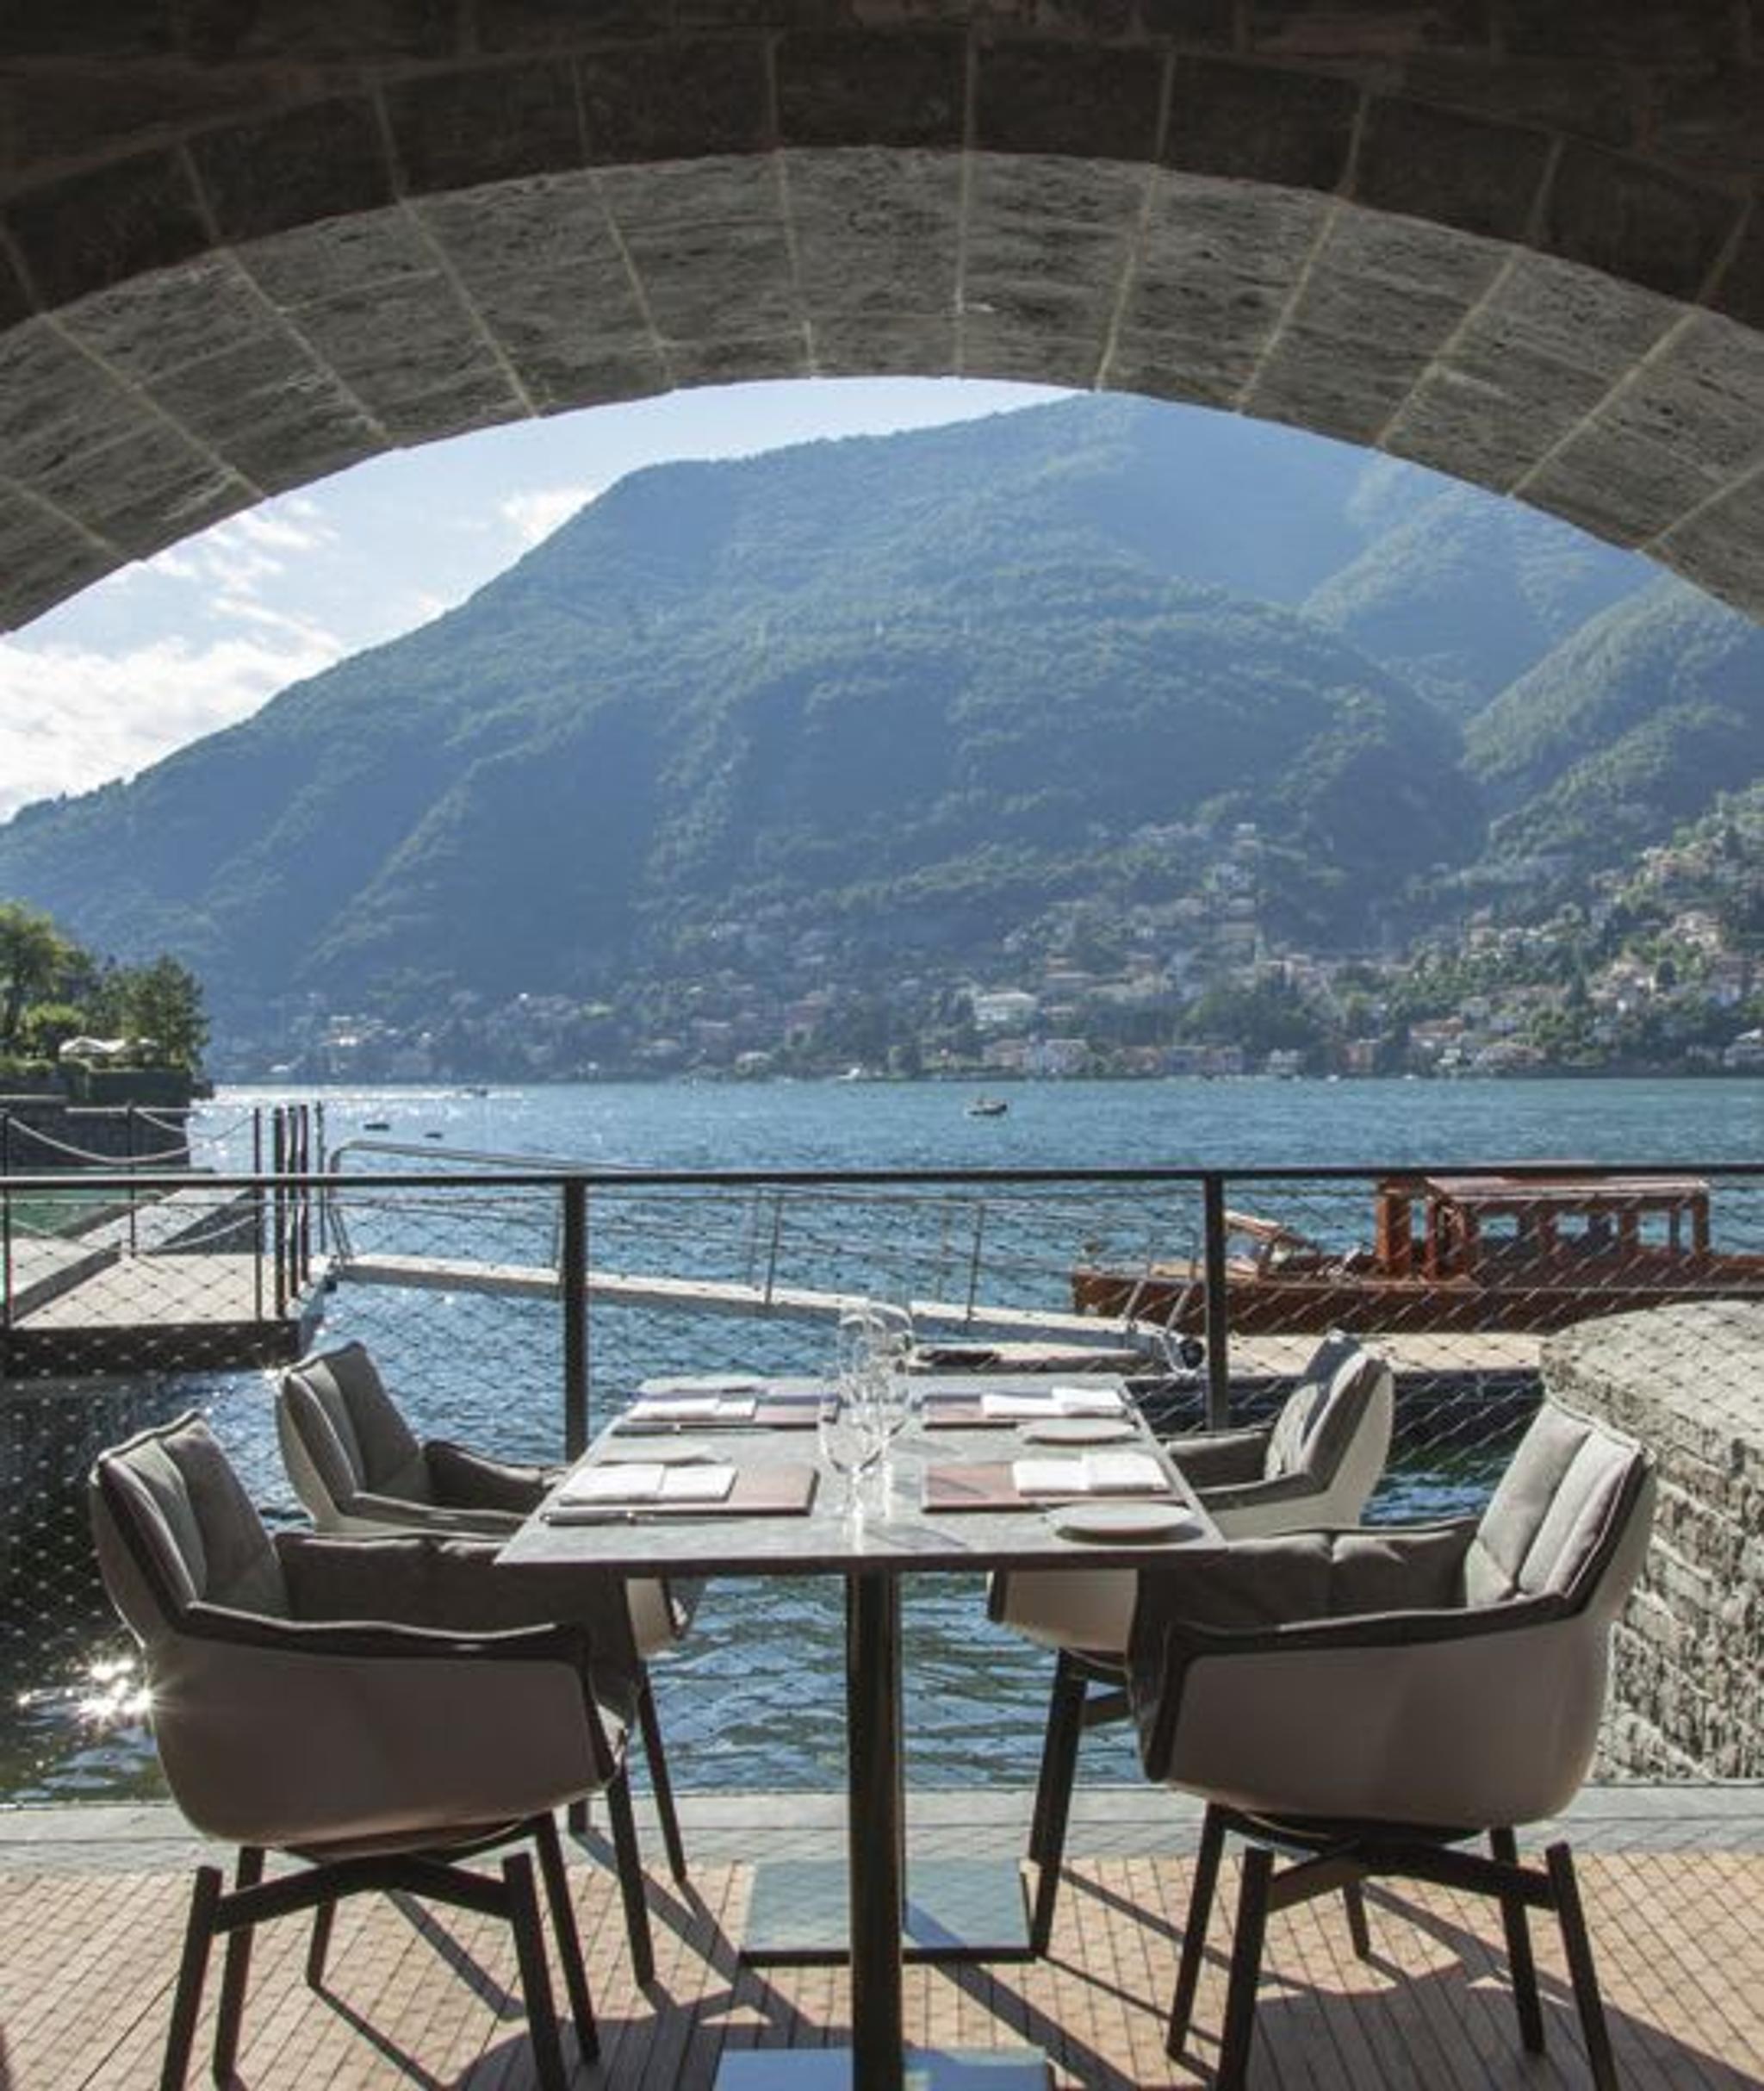 Lunch on the terrace with a view on the beautiful Lake Como